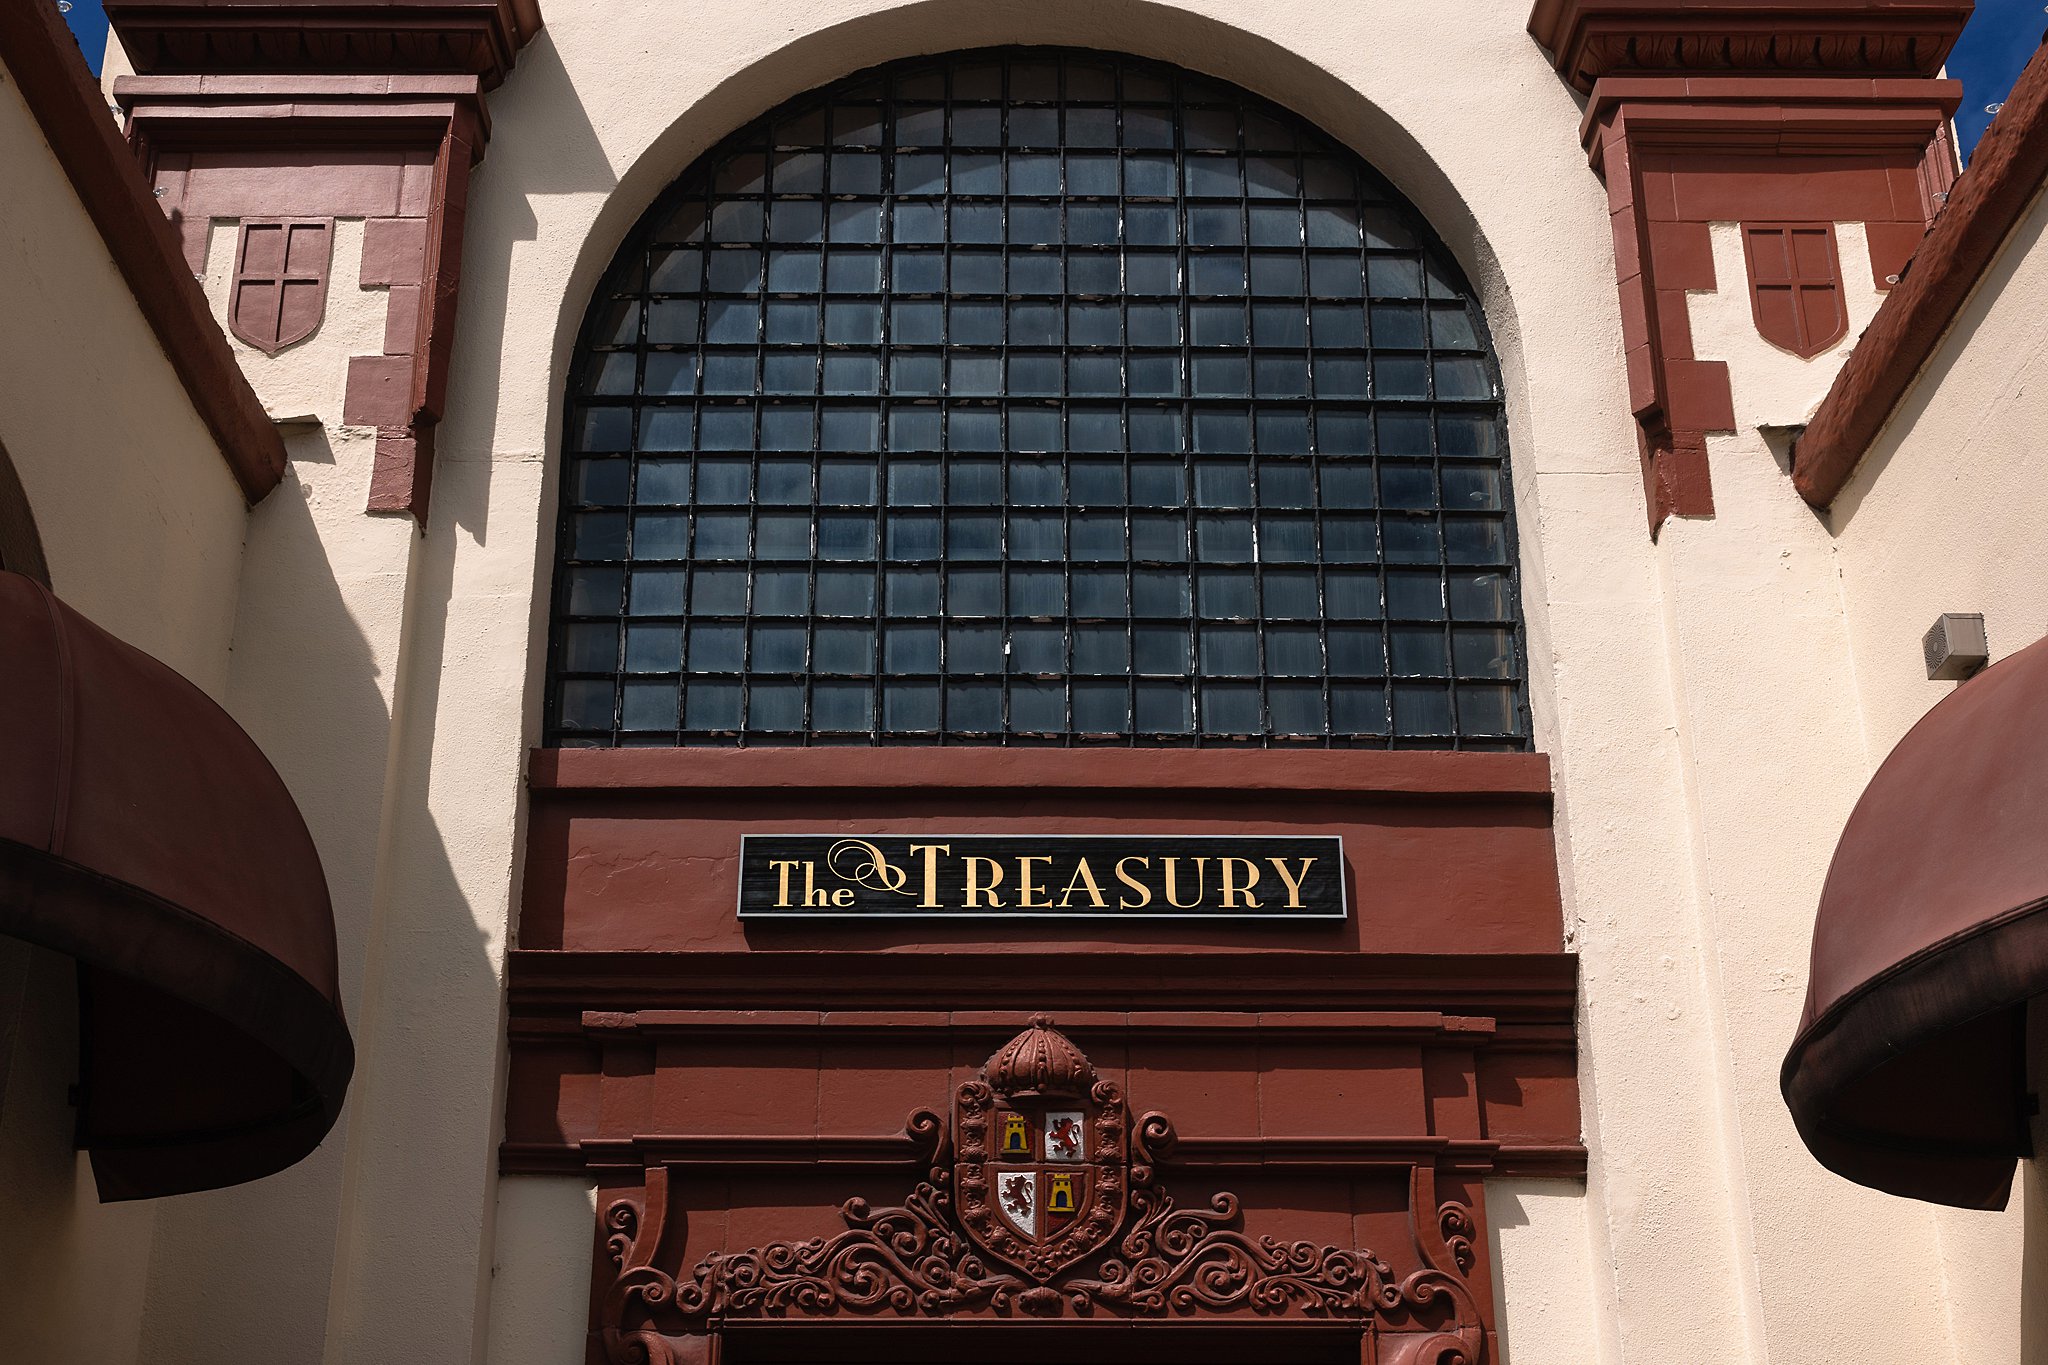 Details of the ornate front facade of the Treasury on the Plaza Wedding venue